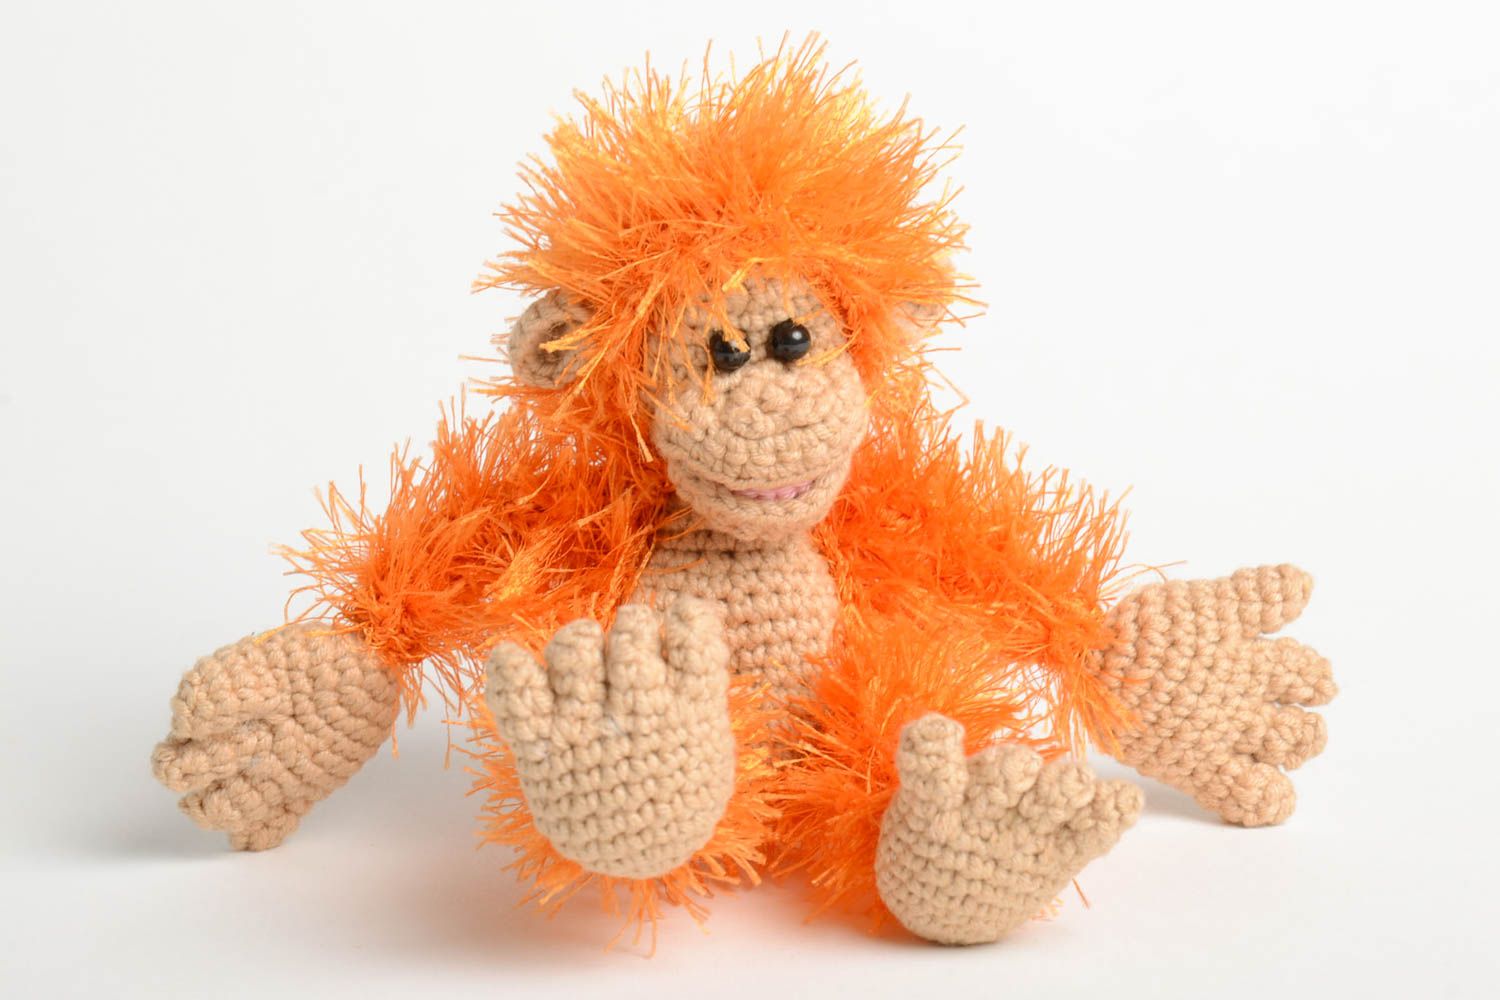 Cute crocheted toy monkey soft toy unusual handmade toy for kids cute toy photo 2